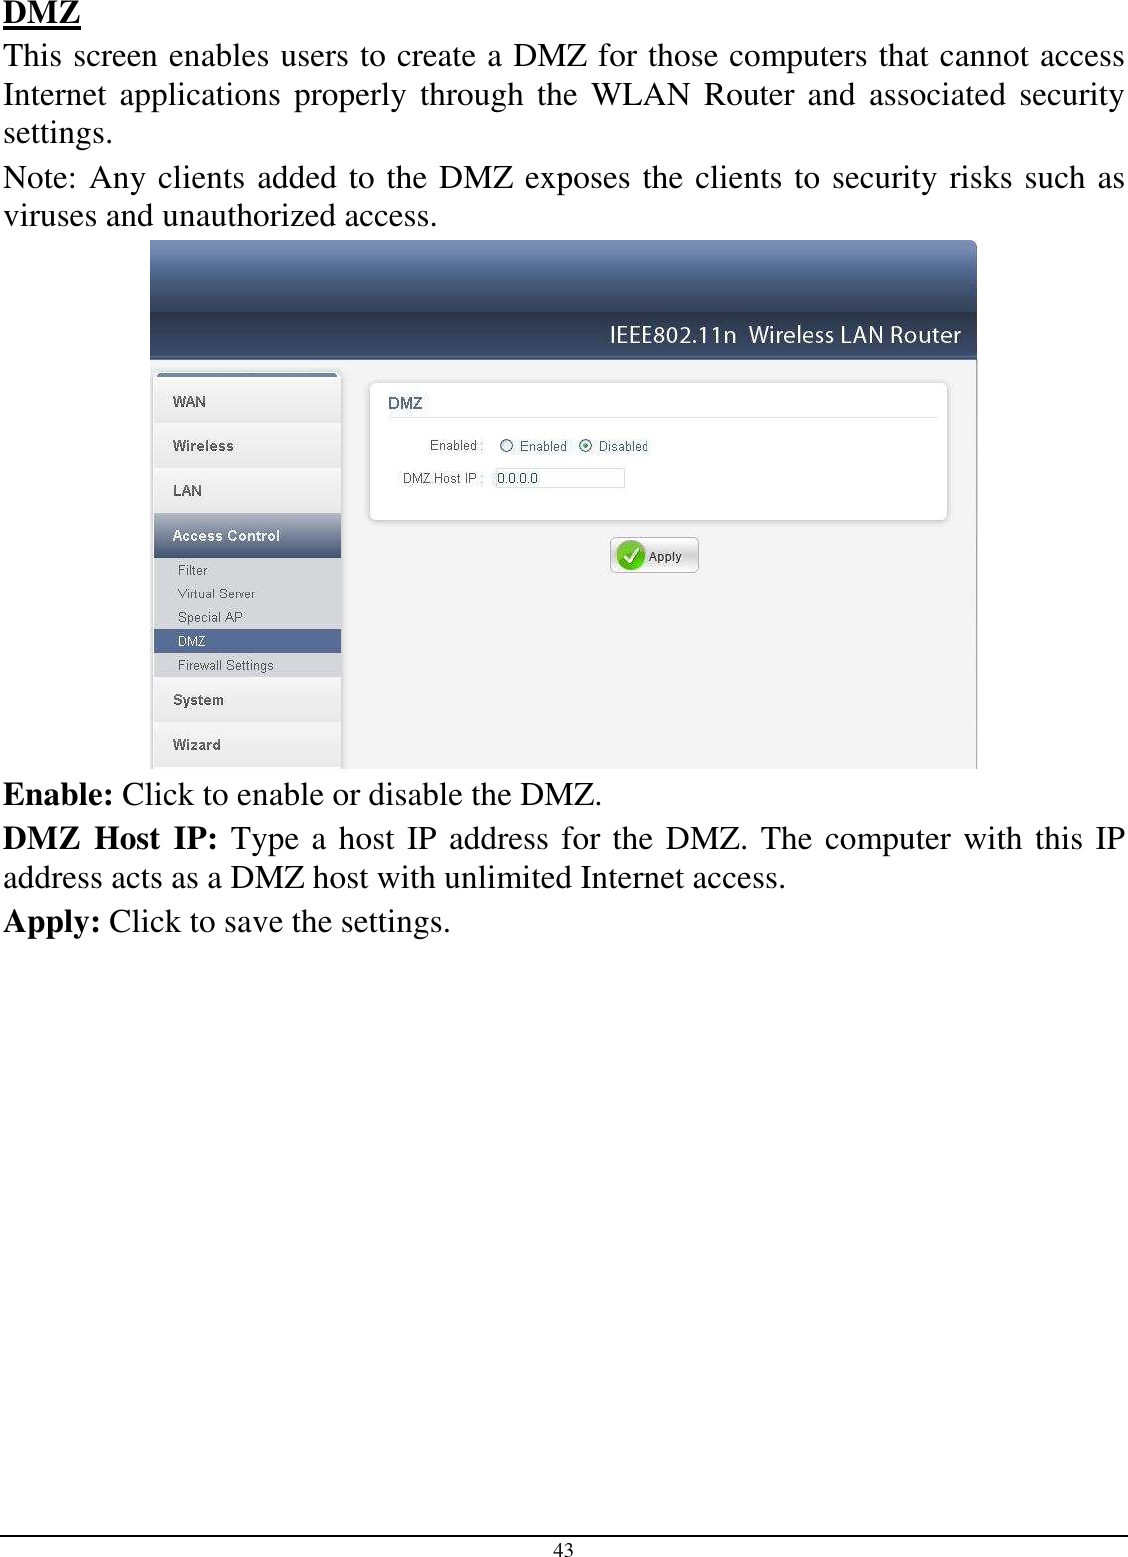 43 DMZ This screen enables users to create a DMZ for those computers that cannot access Internet  applications  properly through  the  WLAN  Router and  associated security settings.  Note: Any clients added to the DMZ exposes the clients to security risks such as viruses and unauthorized access.  Enable: Click to enable or disable the DMZ. DMZ Host IP: Type a host IP address for the DMZ. The computer with this IP address acts as a DMZ host with unlimited Internet access. Apply: Click to save the settings.  